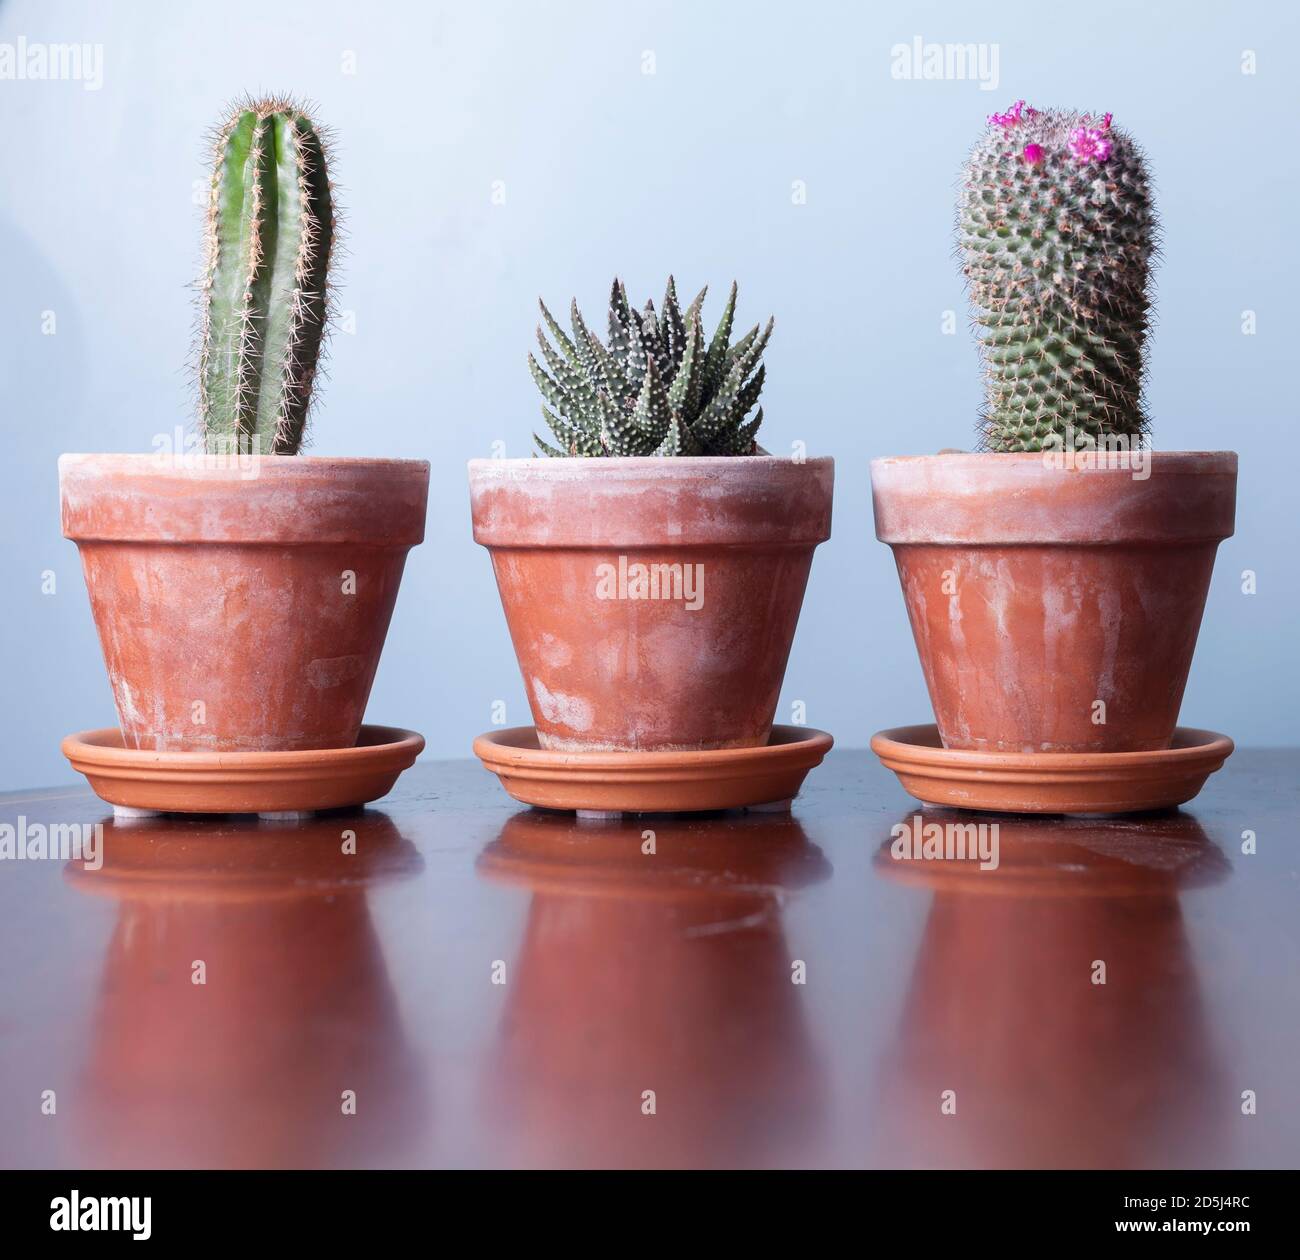 Two Cacti & a Haworthia plant in terracotta pots,with a cool blue background. Stock Photo